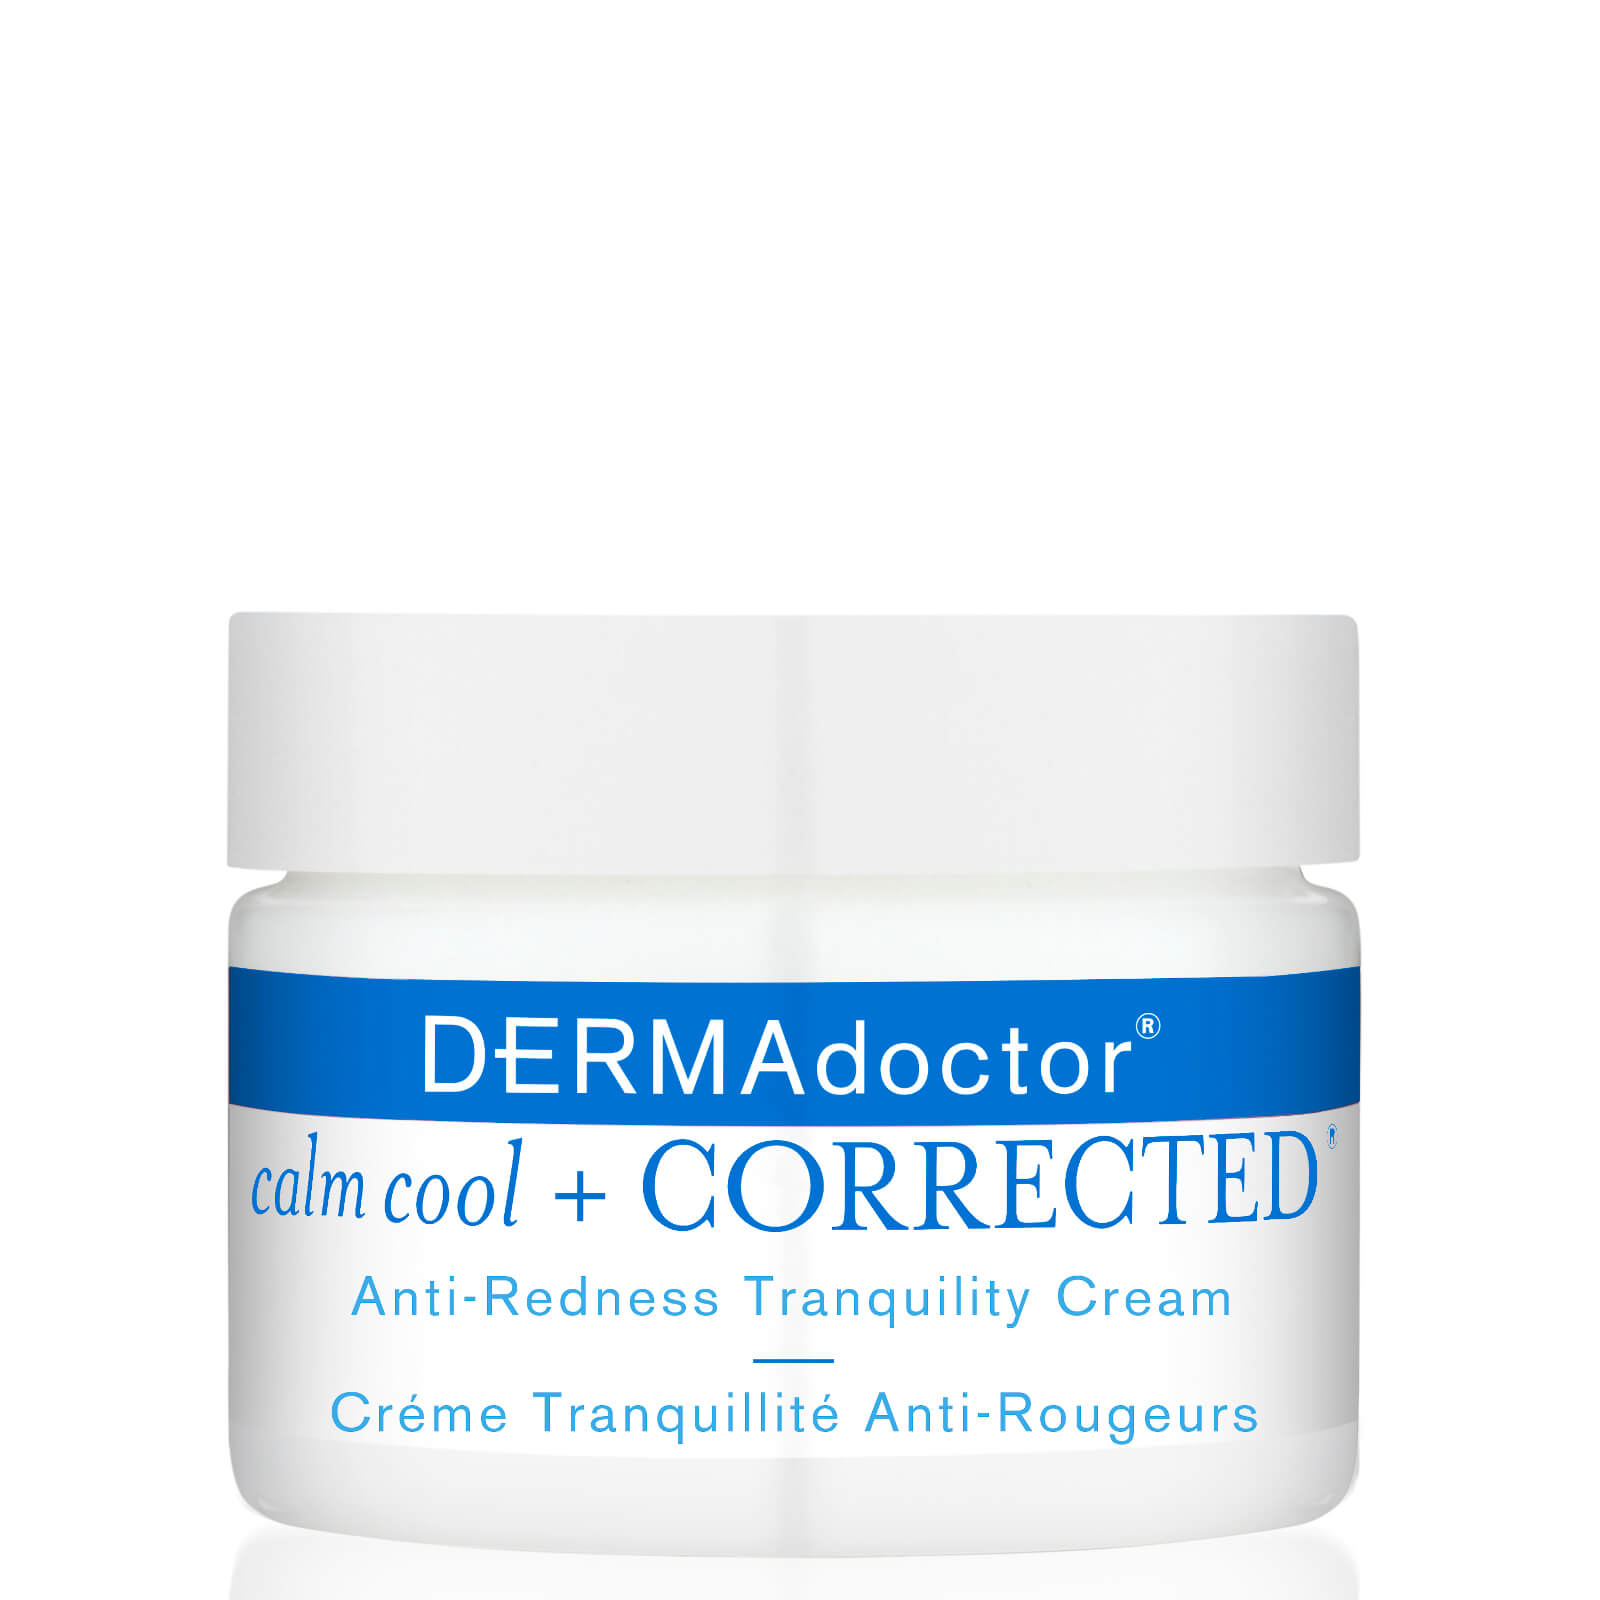 DERMADOCTOR CALM, COOL AND CORRECTED ANTI-REDNESS TRANQUILITY CREAM 50ML,20286-7